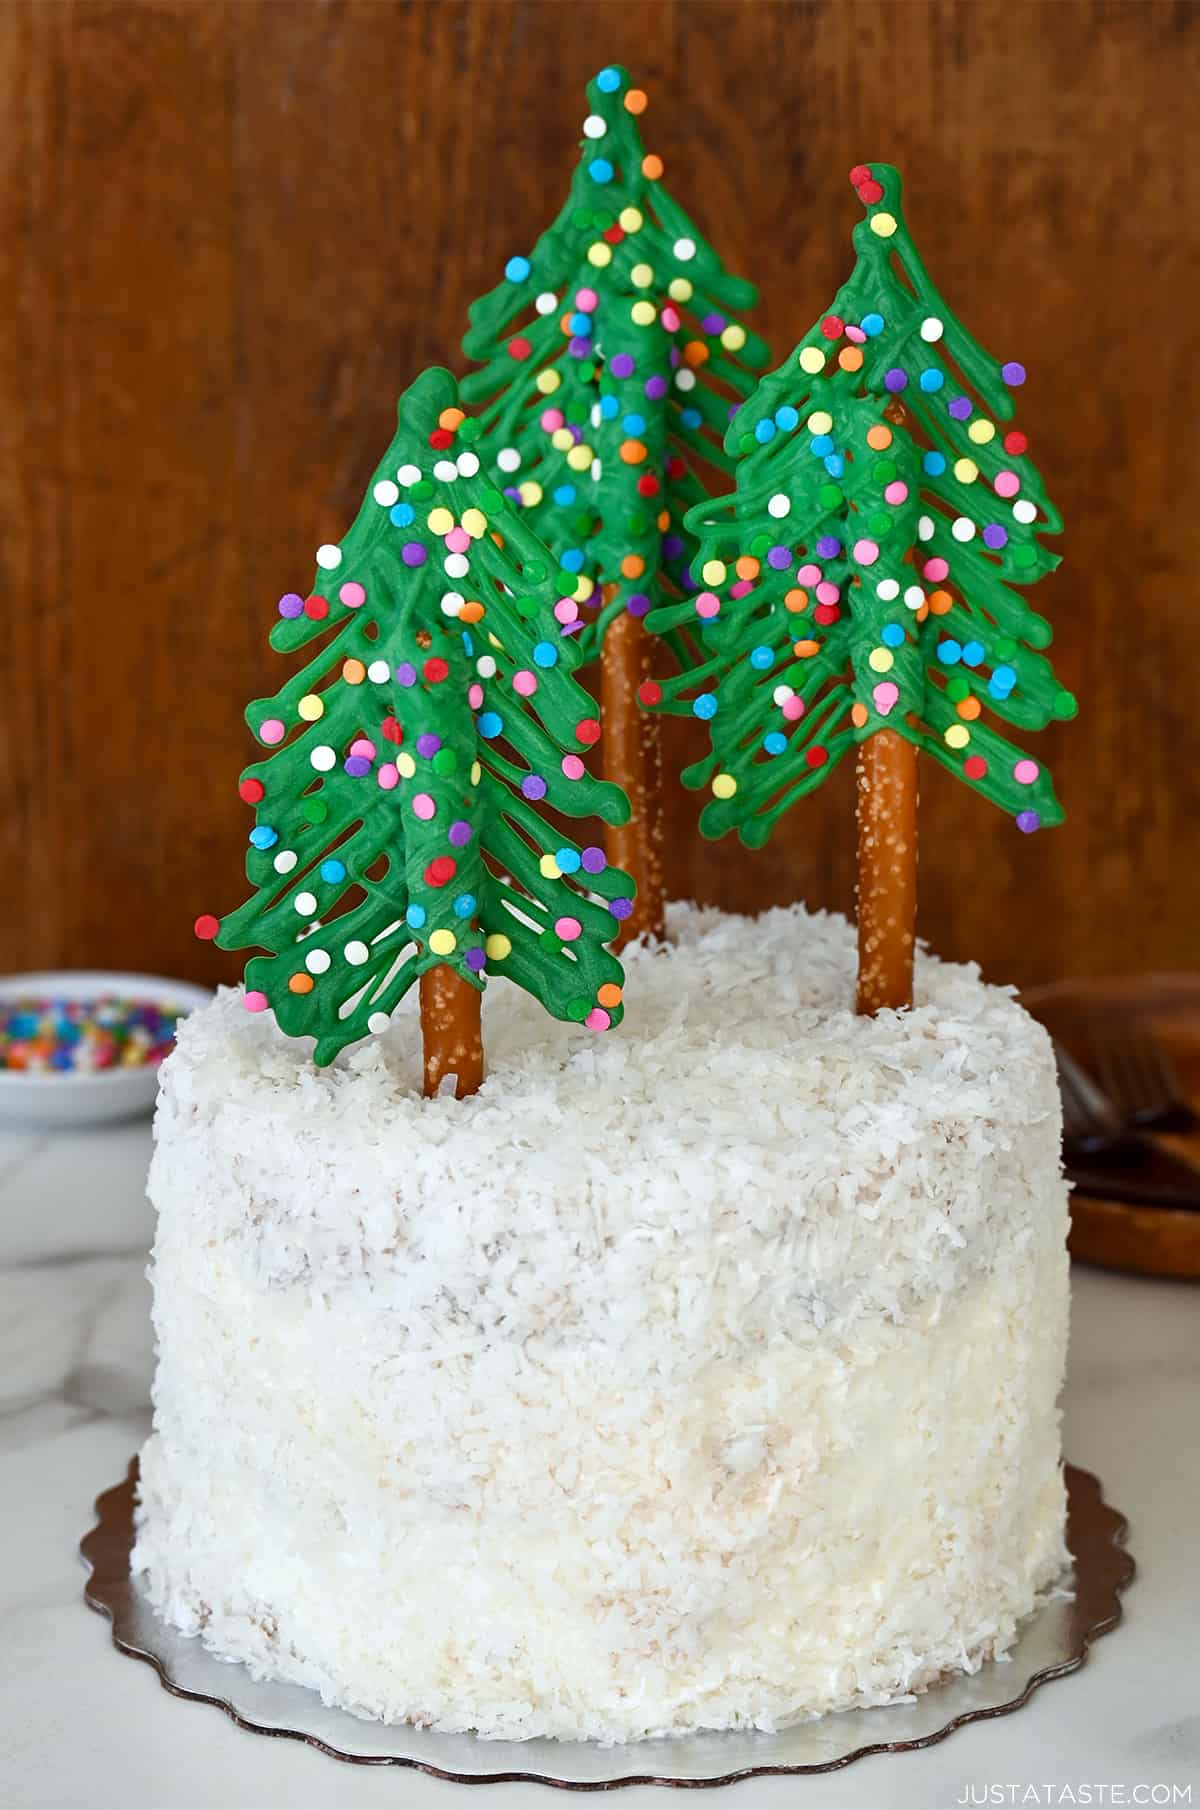 A cake covered in shredded coconut and topped with pretzel rod and candy melt Christmas trees.